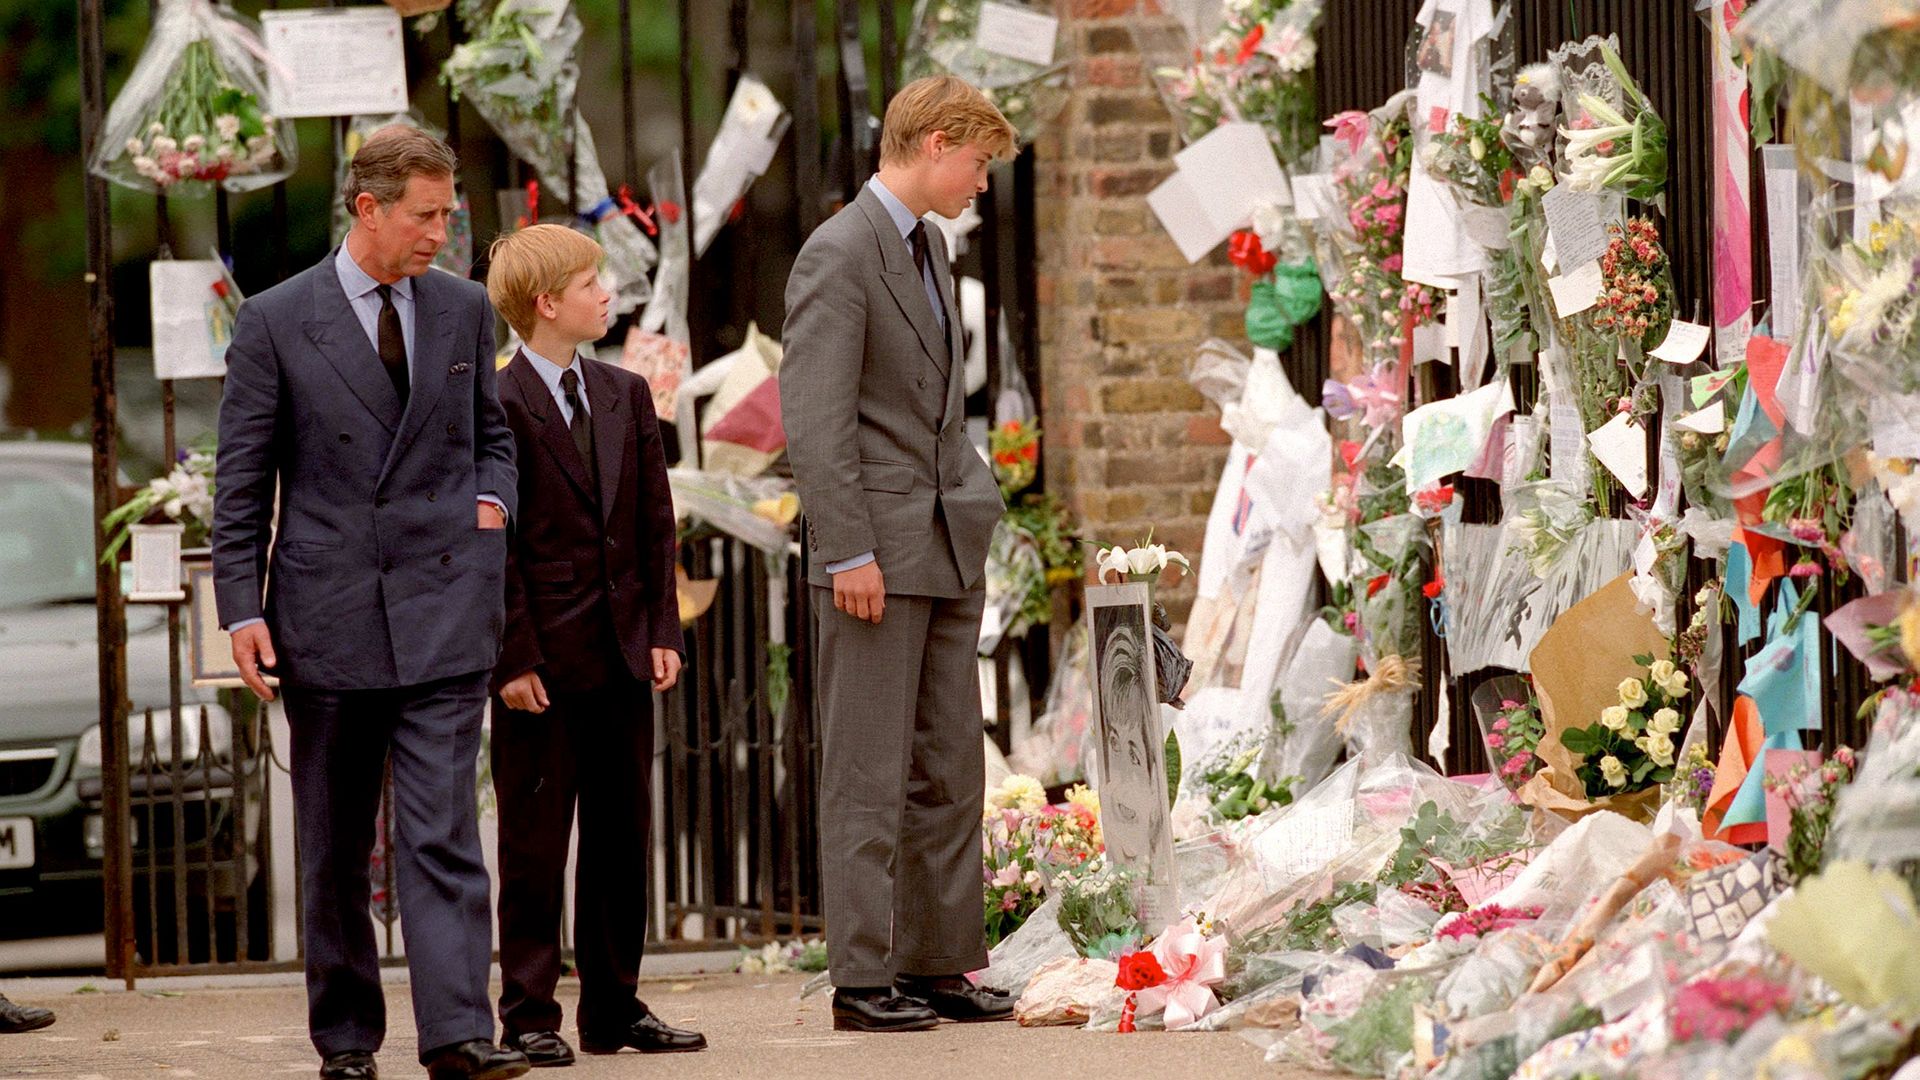 The trip Prince William was meant to have taken the day Princess Diana died revealed by royal pilot